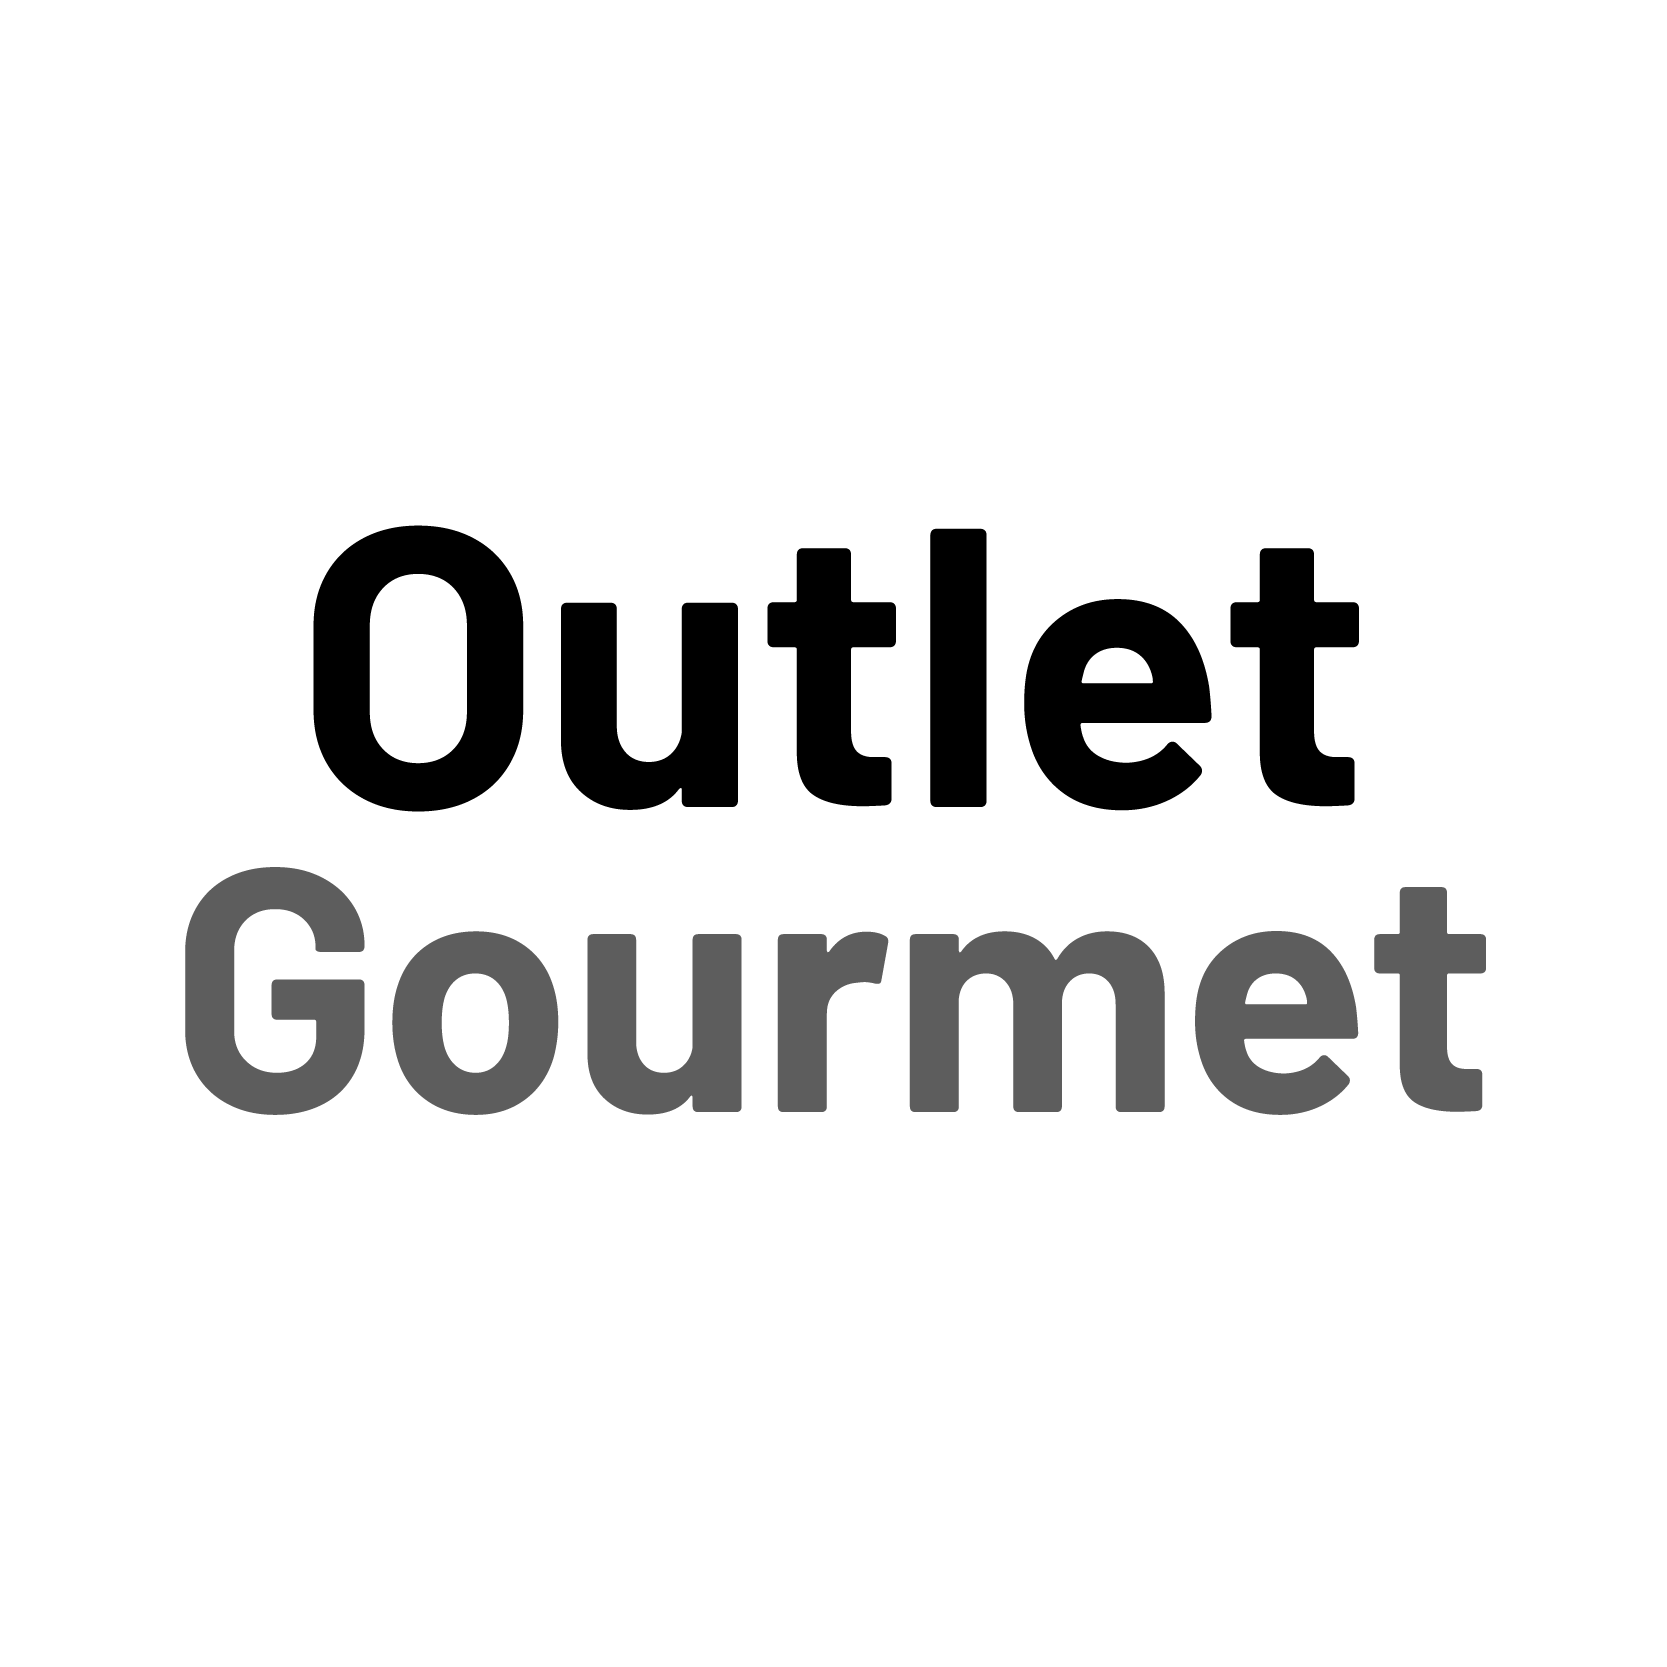 Outlet Gourmet